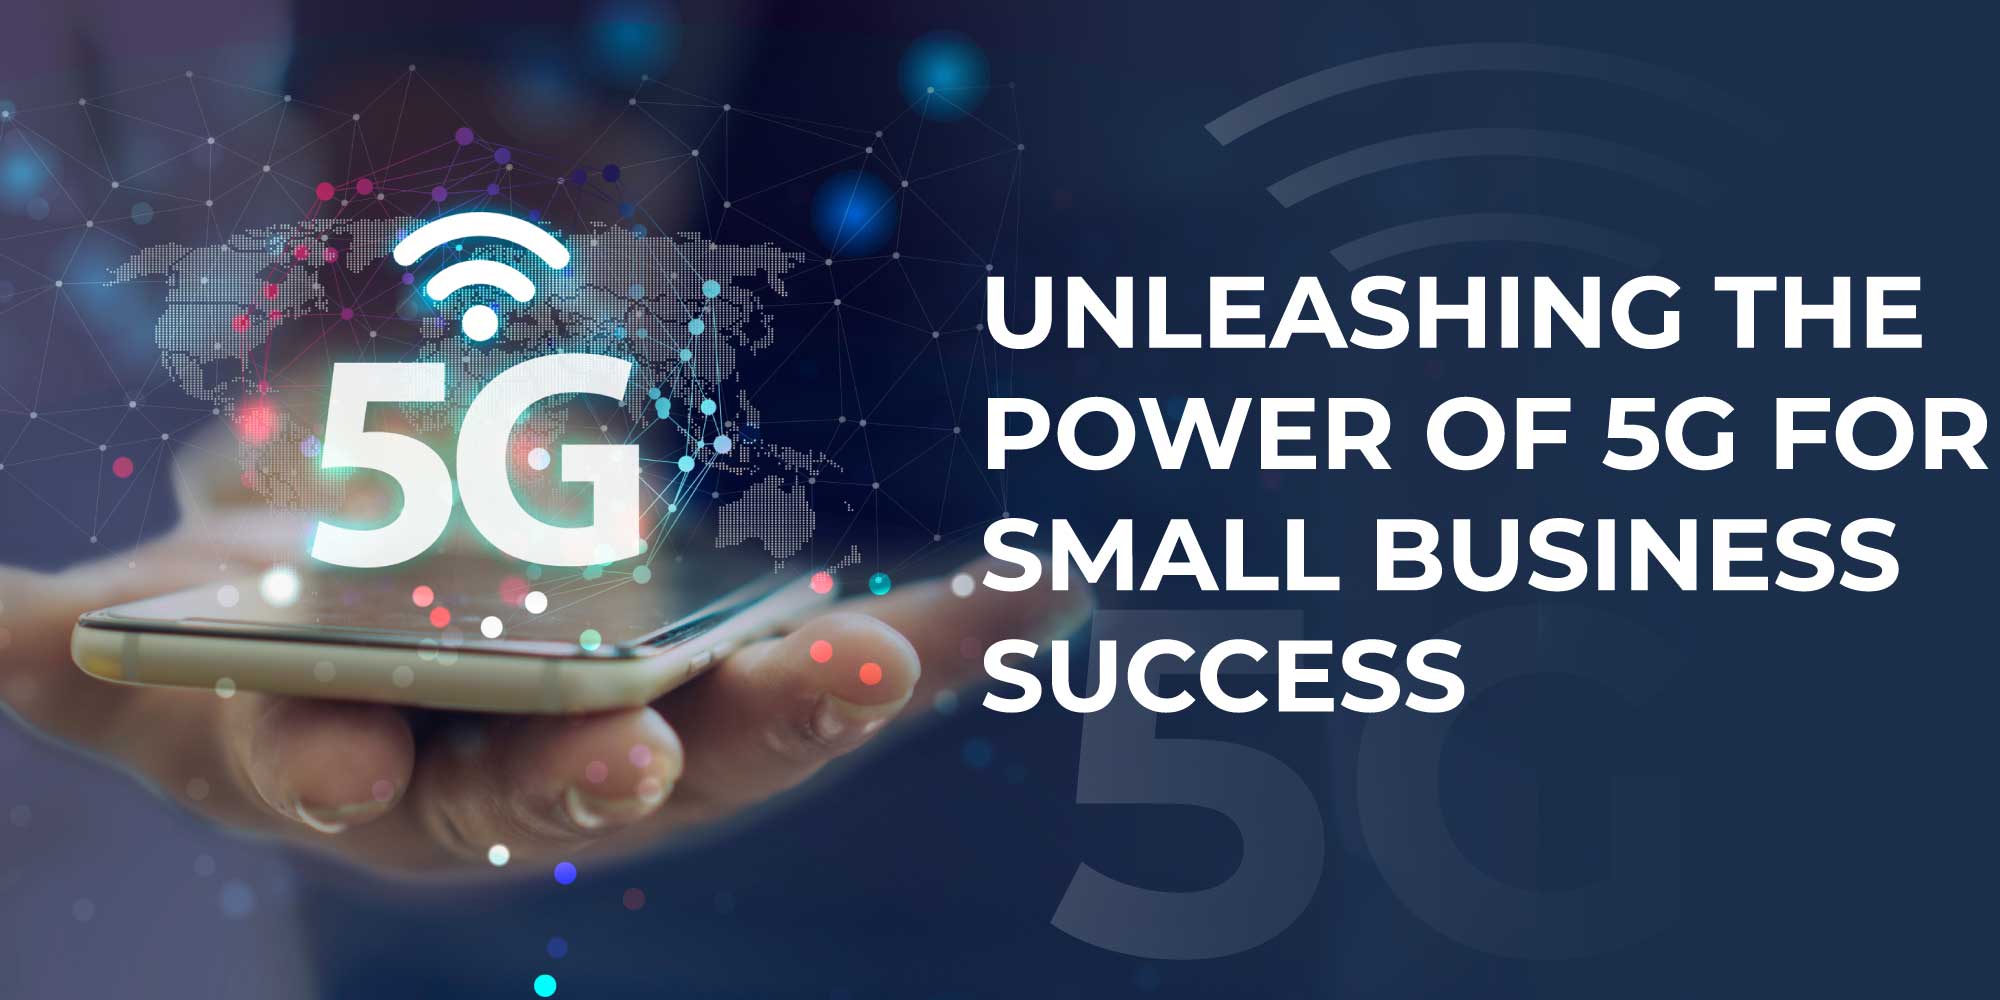 Power of 5G for